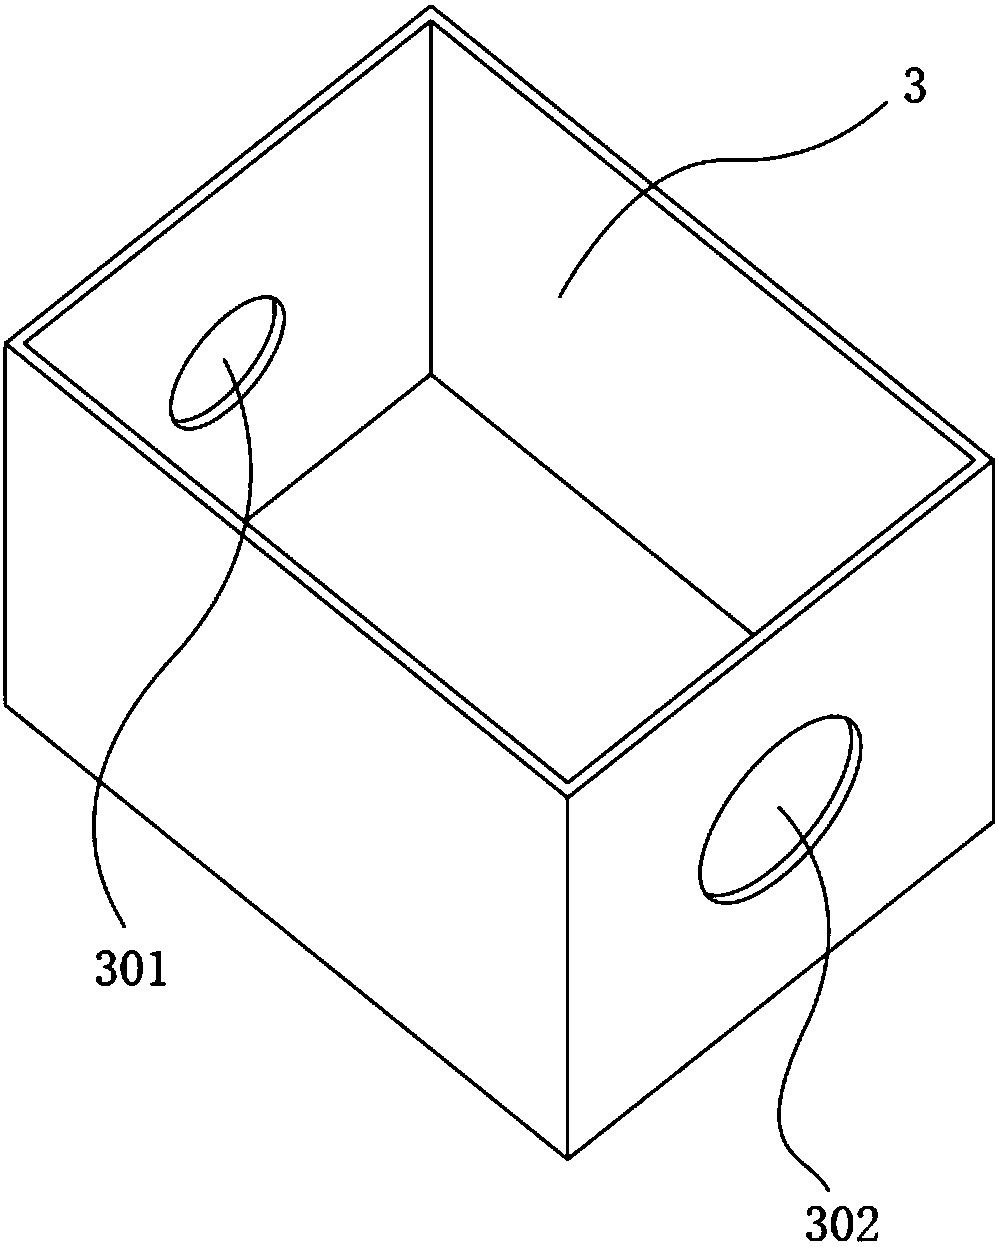 Novel transparent soil model test device for simulating tunnel excavation and test method thereof